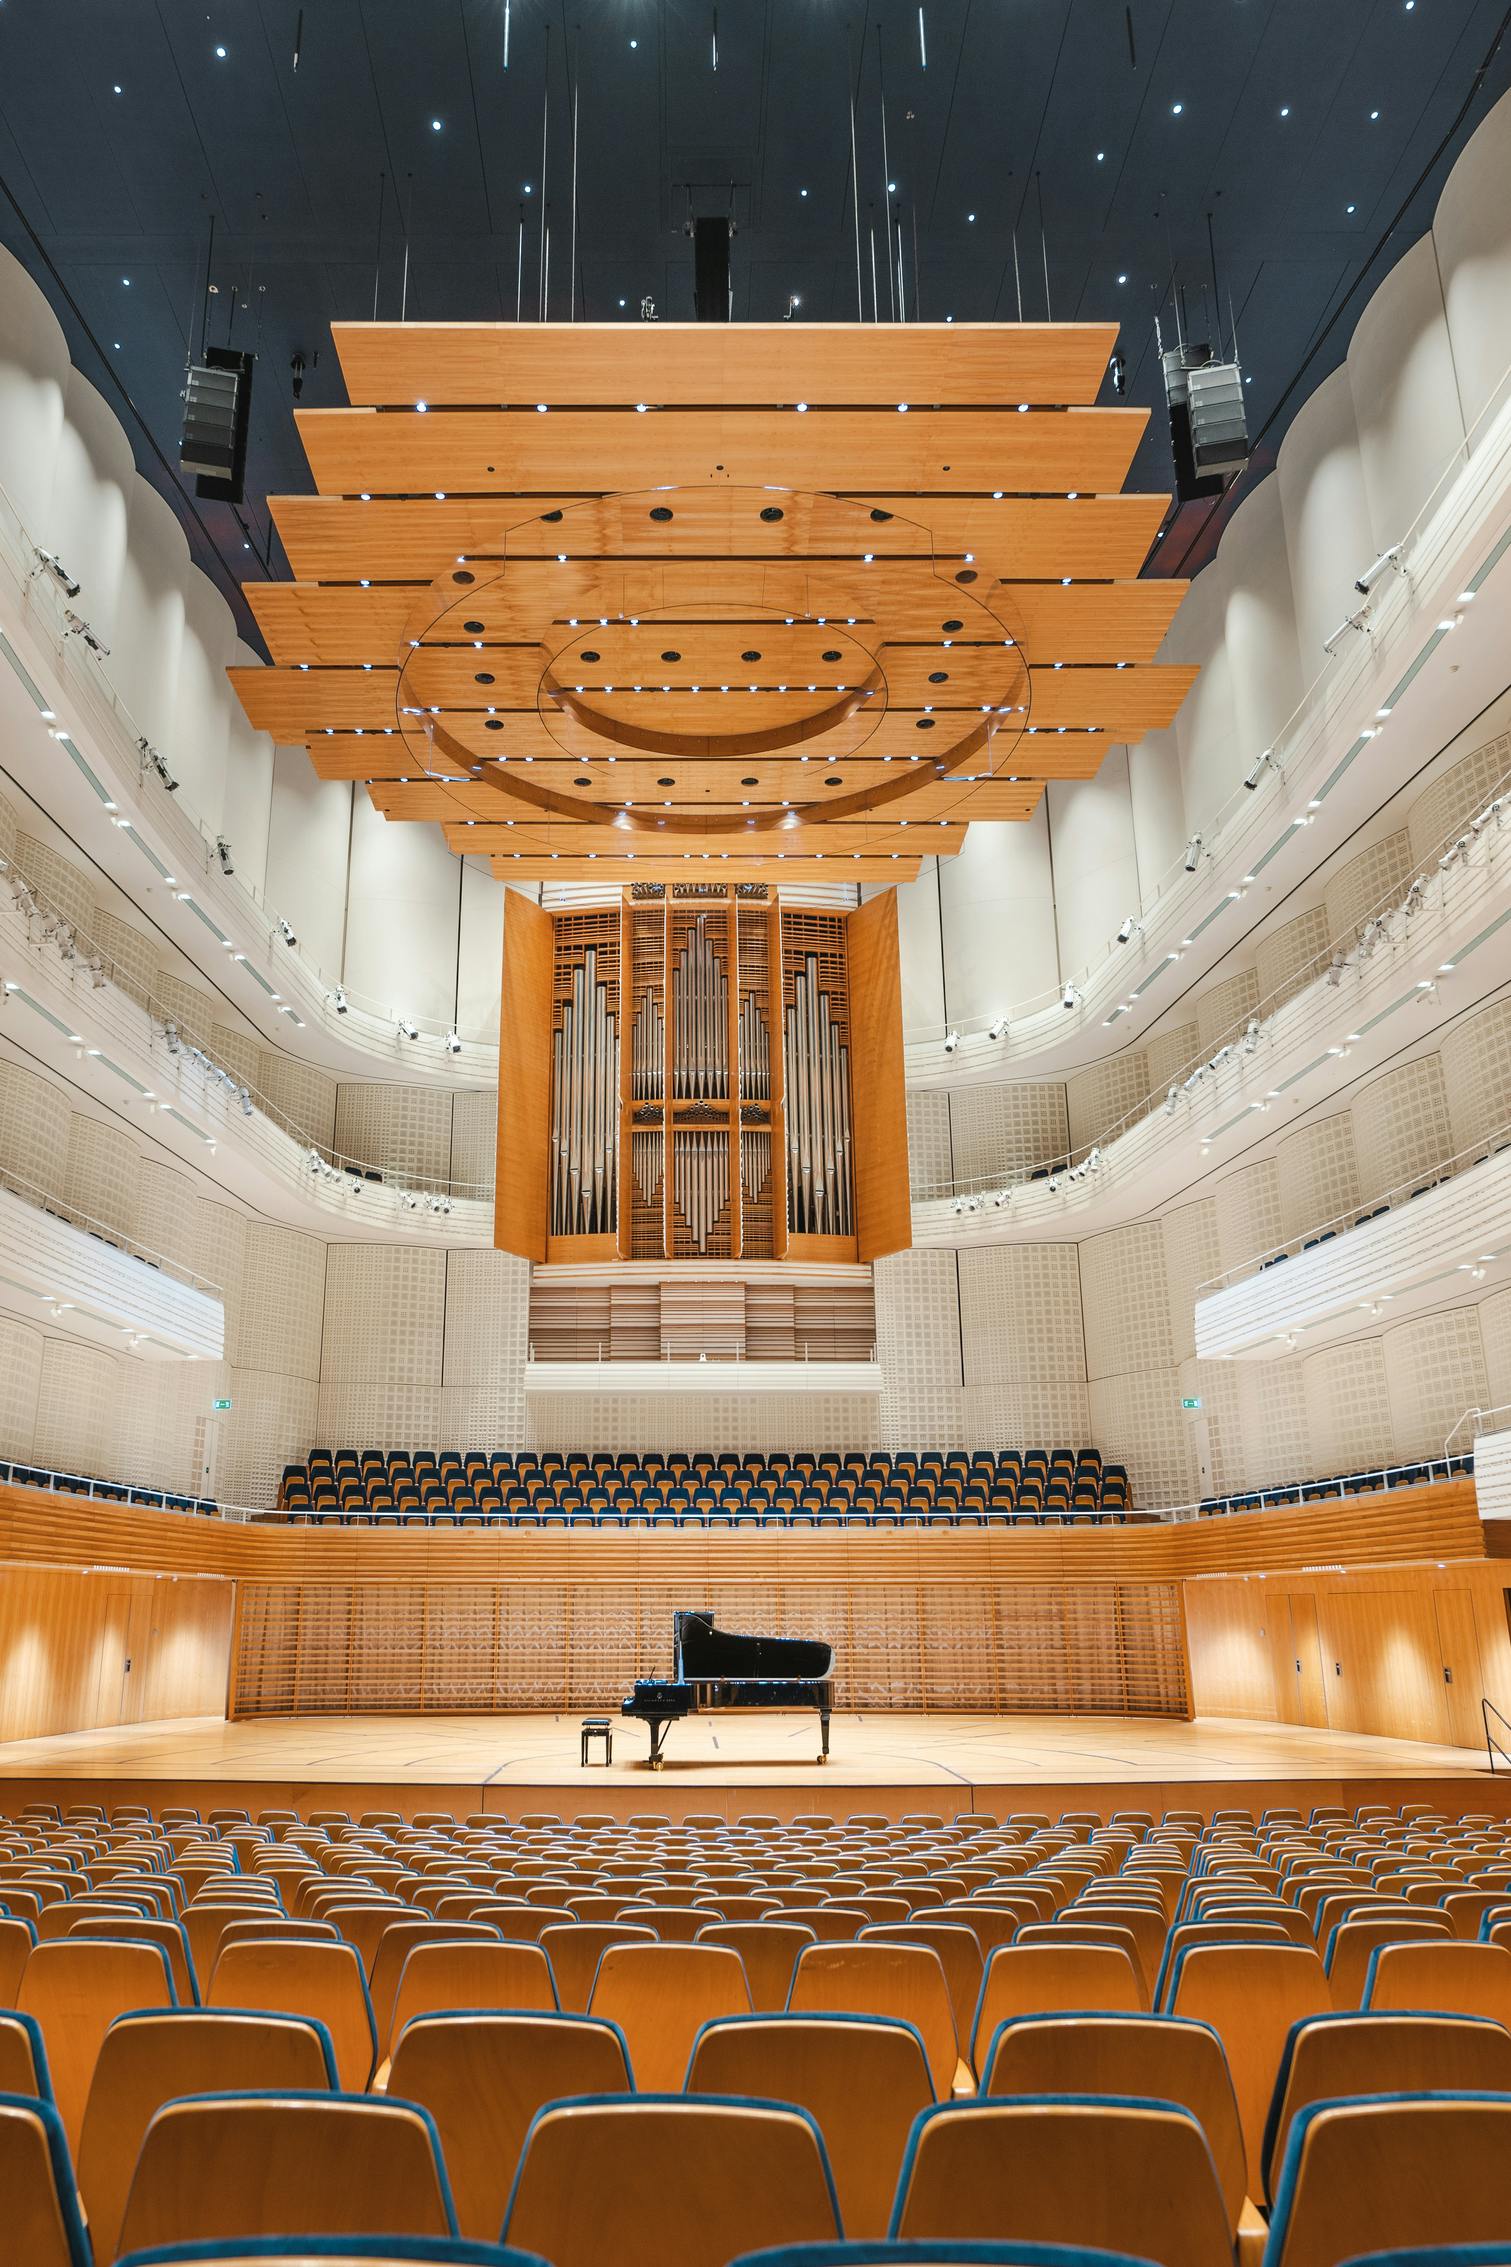 The Concert Hall at the KKL Luzern with a Grand Piano on the Stage